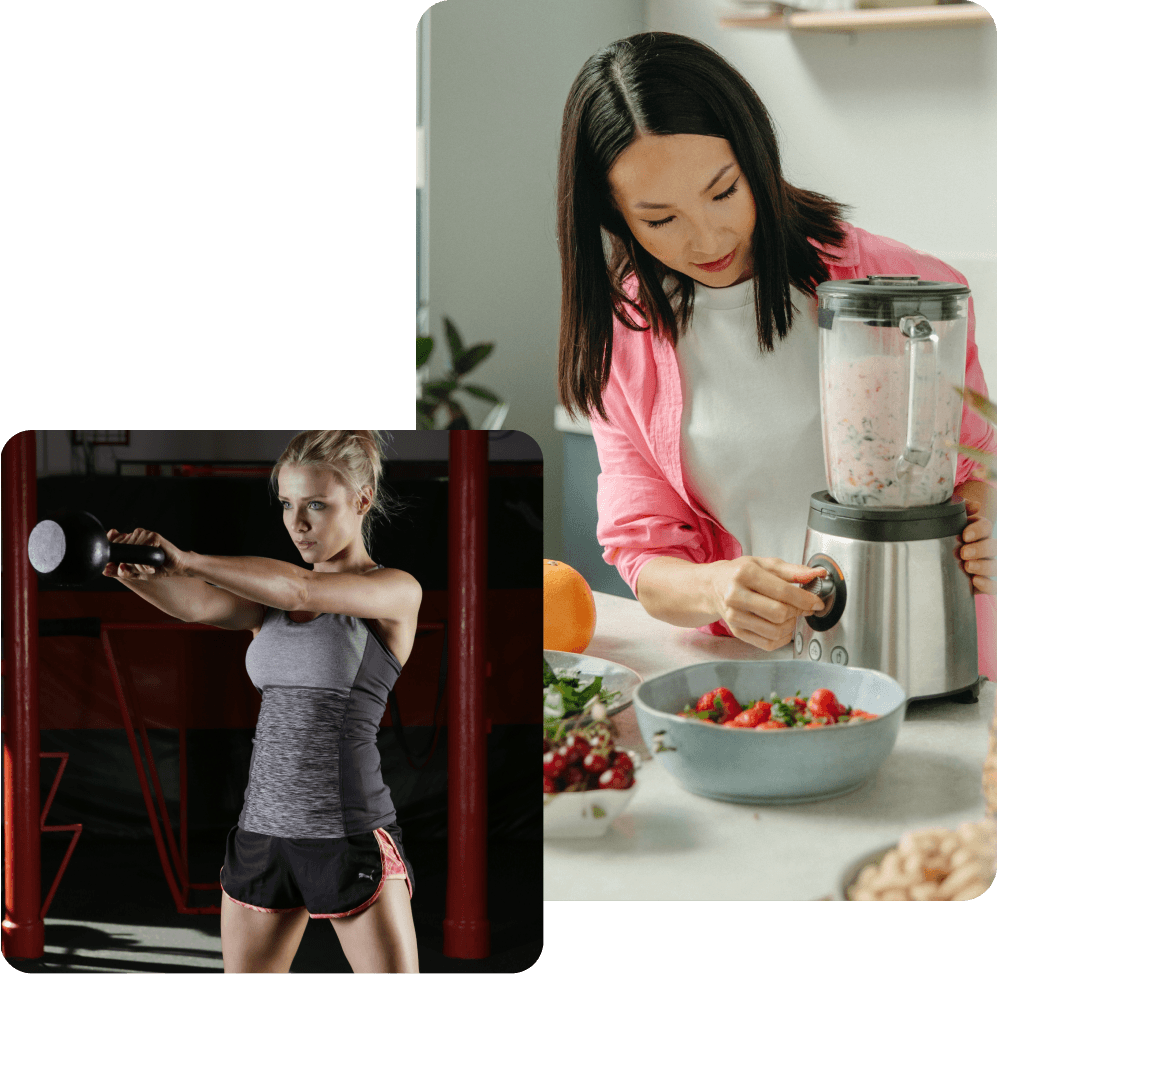 Woman making shake and woman working out